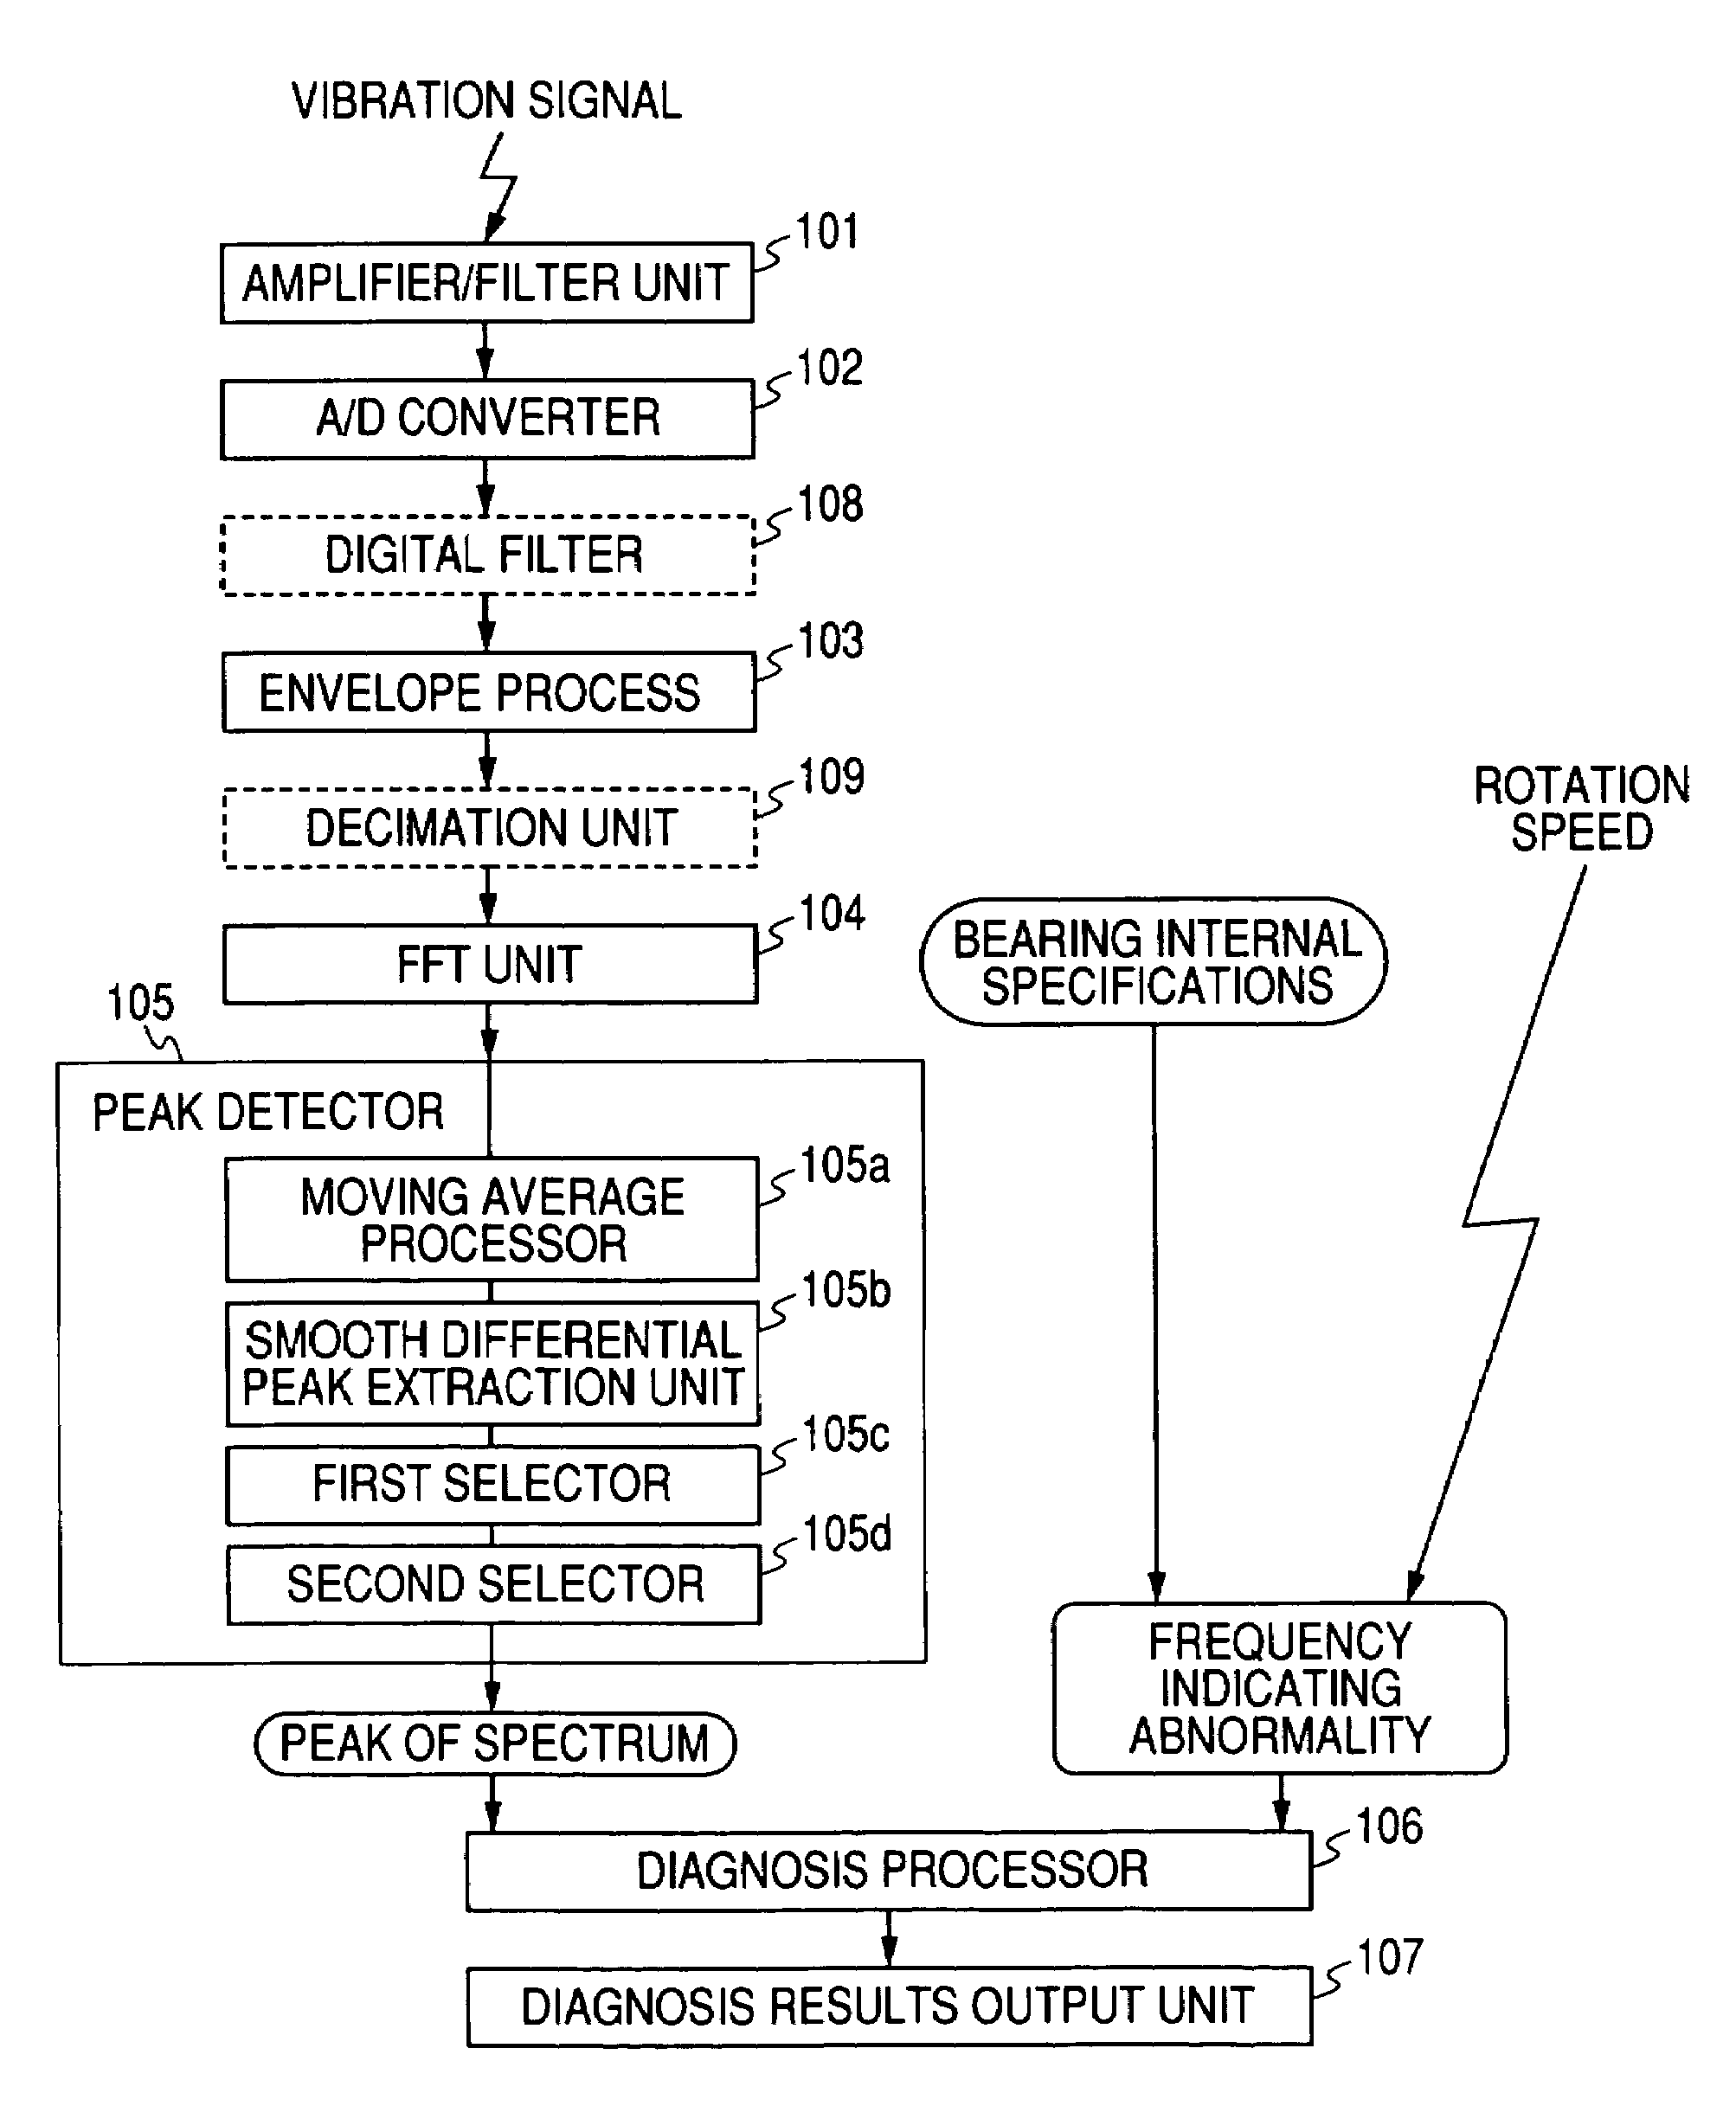 Abnormality diagnosing system for mechanical equipment